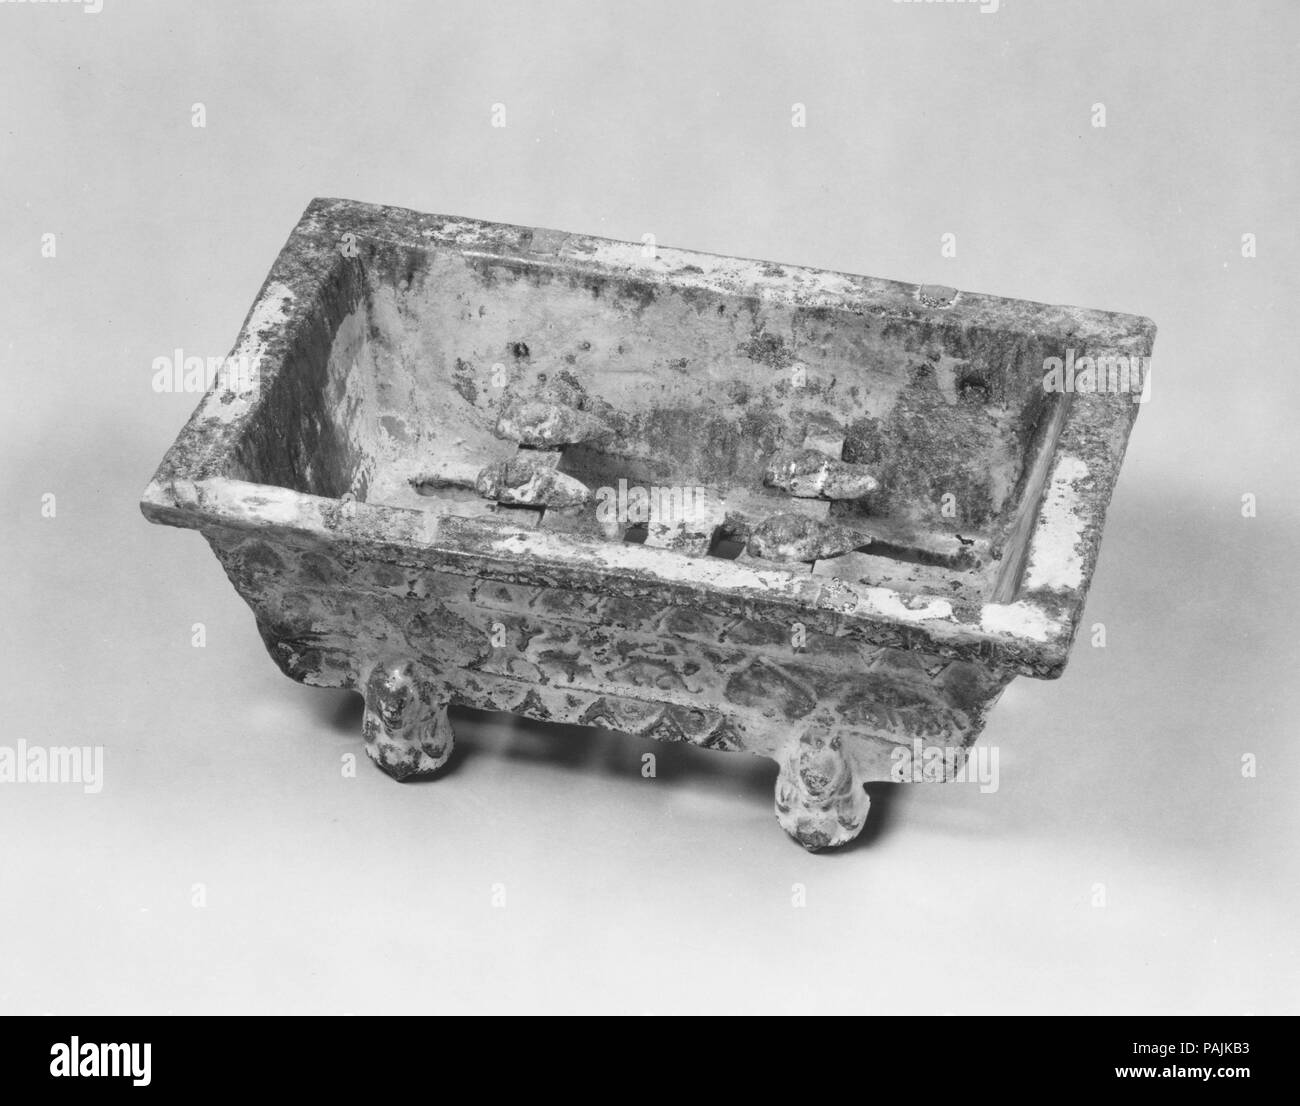 Model of a Rectangular Brazier. Culture: China. Dimensions: H. 3 9/16 in. (9 cm); W. 9 1/4 in. (23.5 cm). Date: 1st-2nd century. Museum: Metropolitan Museum of Art, New York, USA. Stock Photo